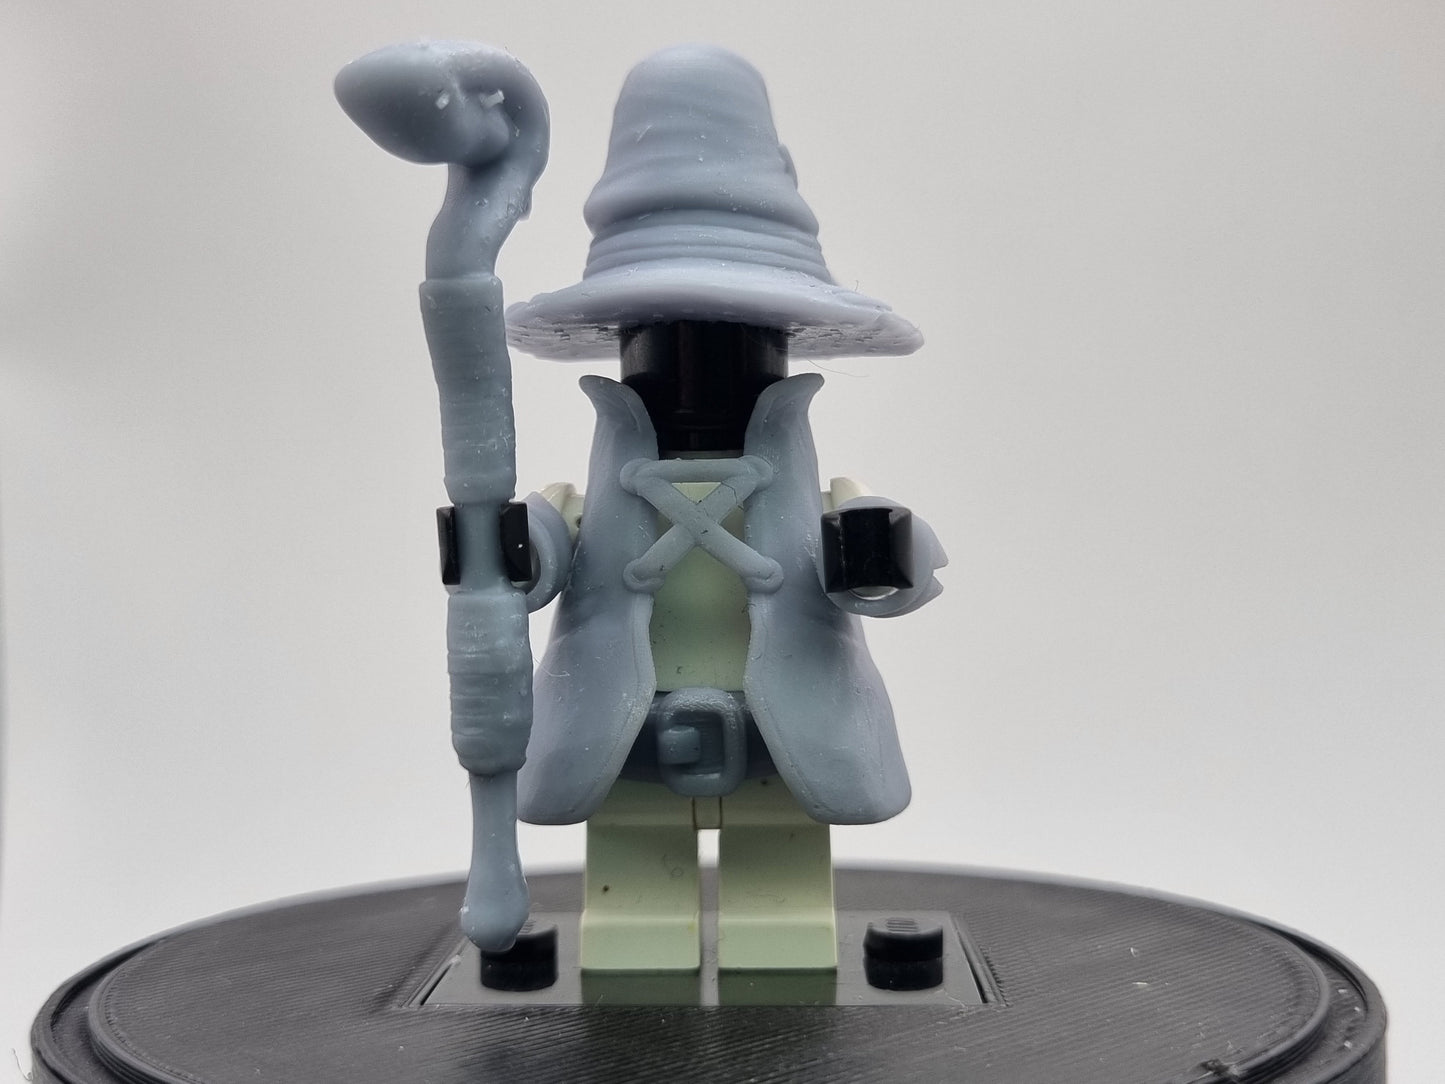 Building toy custom 3D wizard with staff armor set!